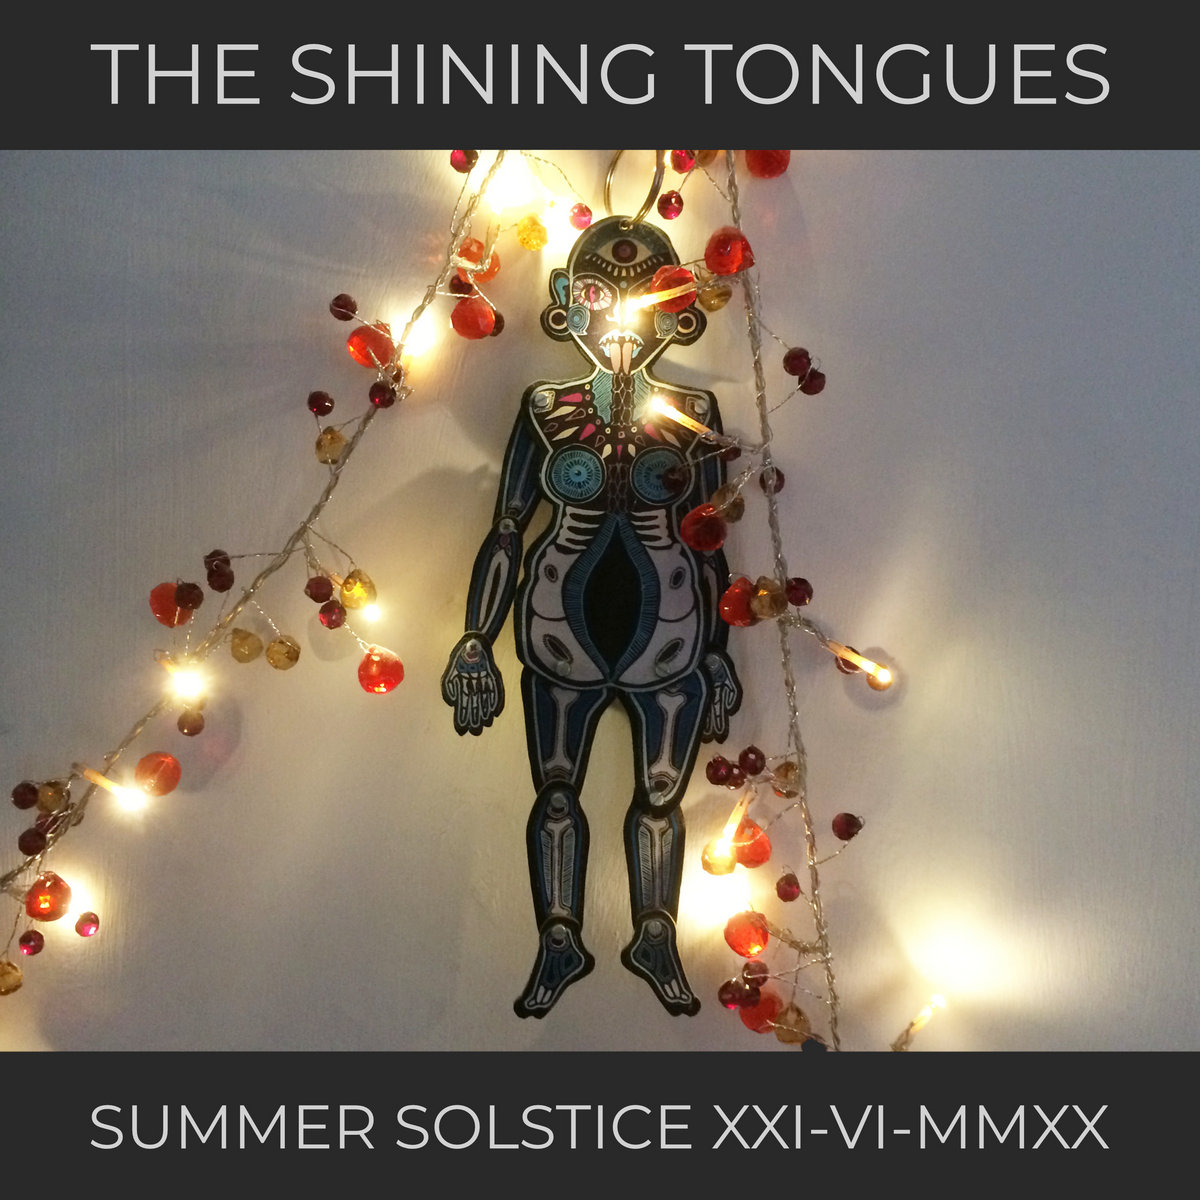 SUMMER SOLSTICE XXI-VI-MMXX by The Shining Tongues